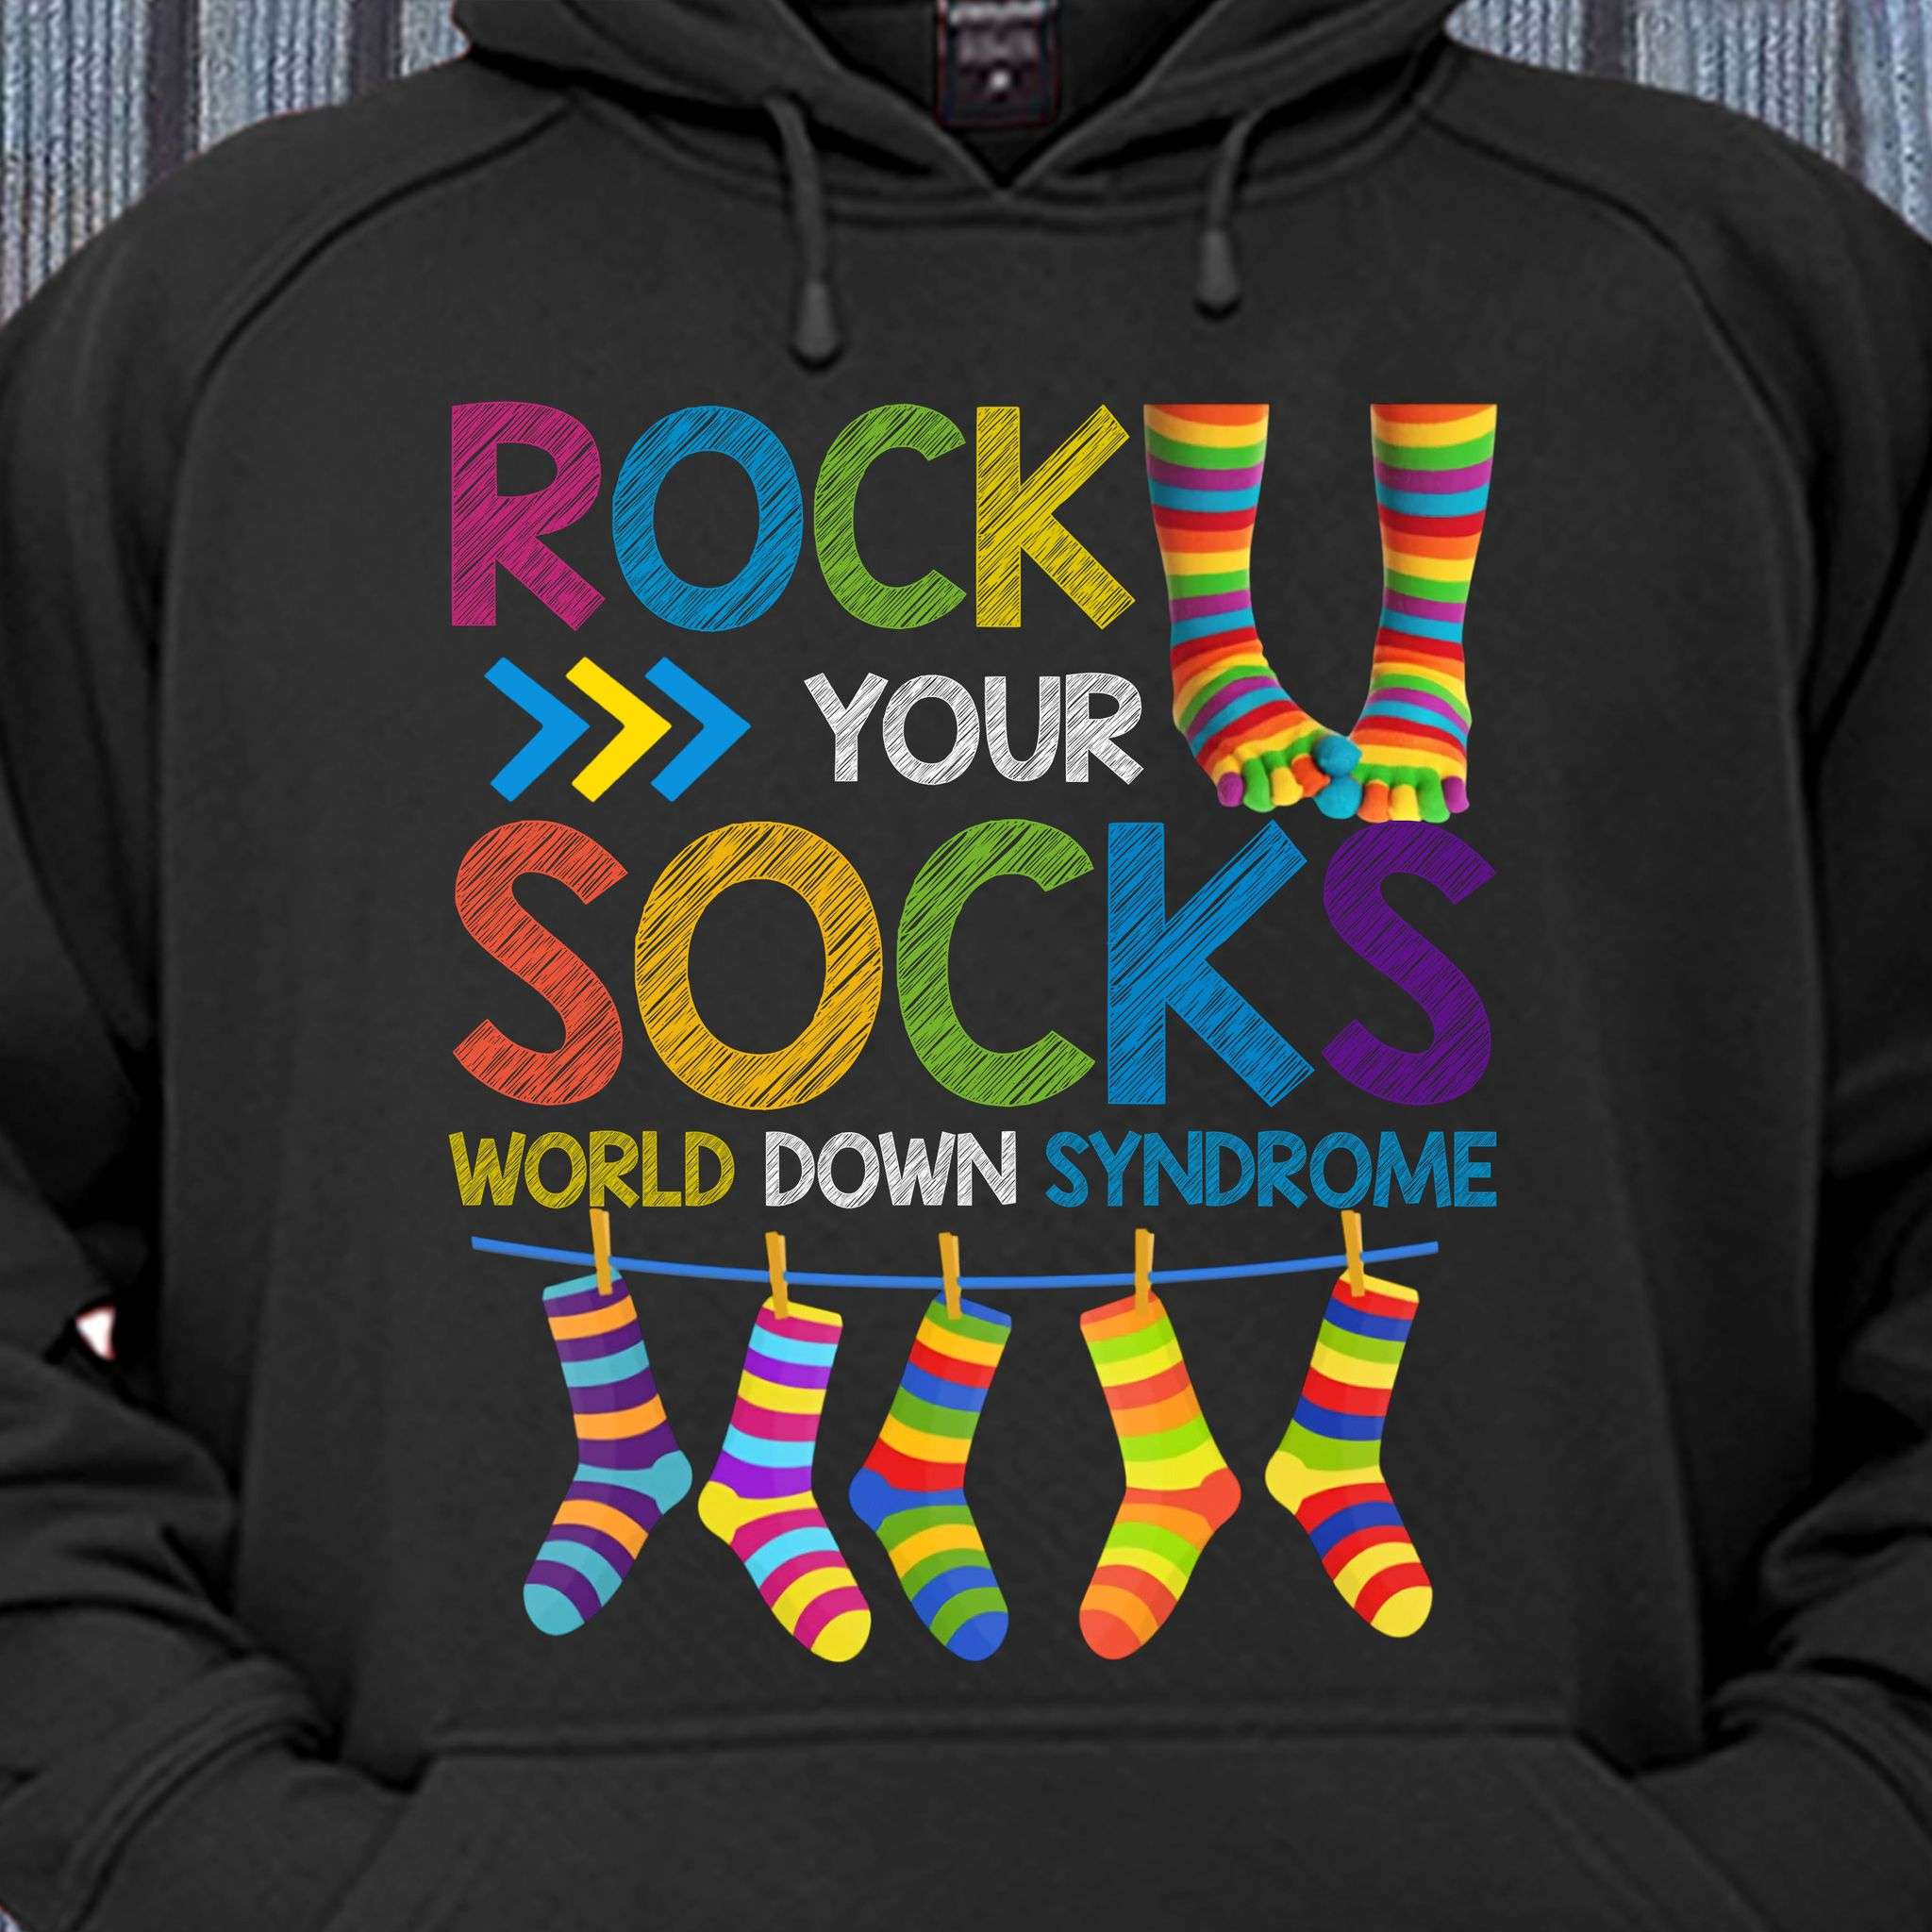 Rock your sock, world down syndrome - Down Syndrome Awareness